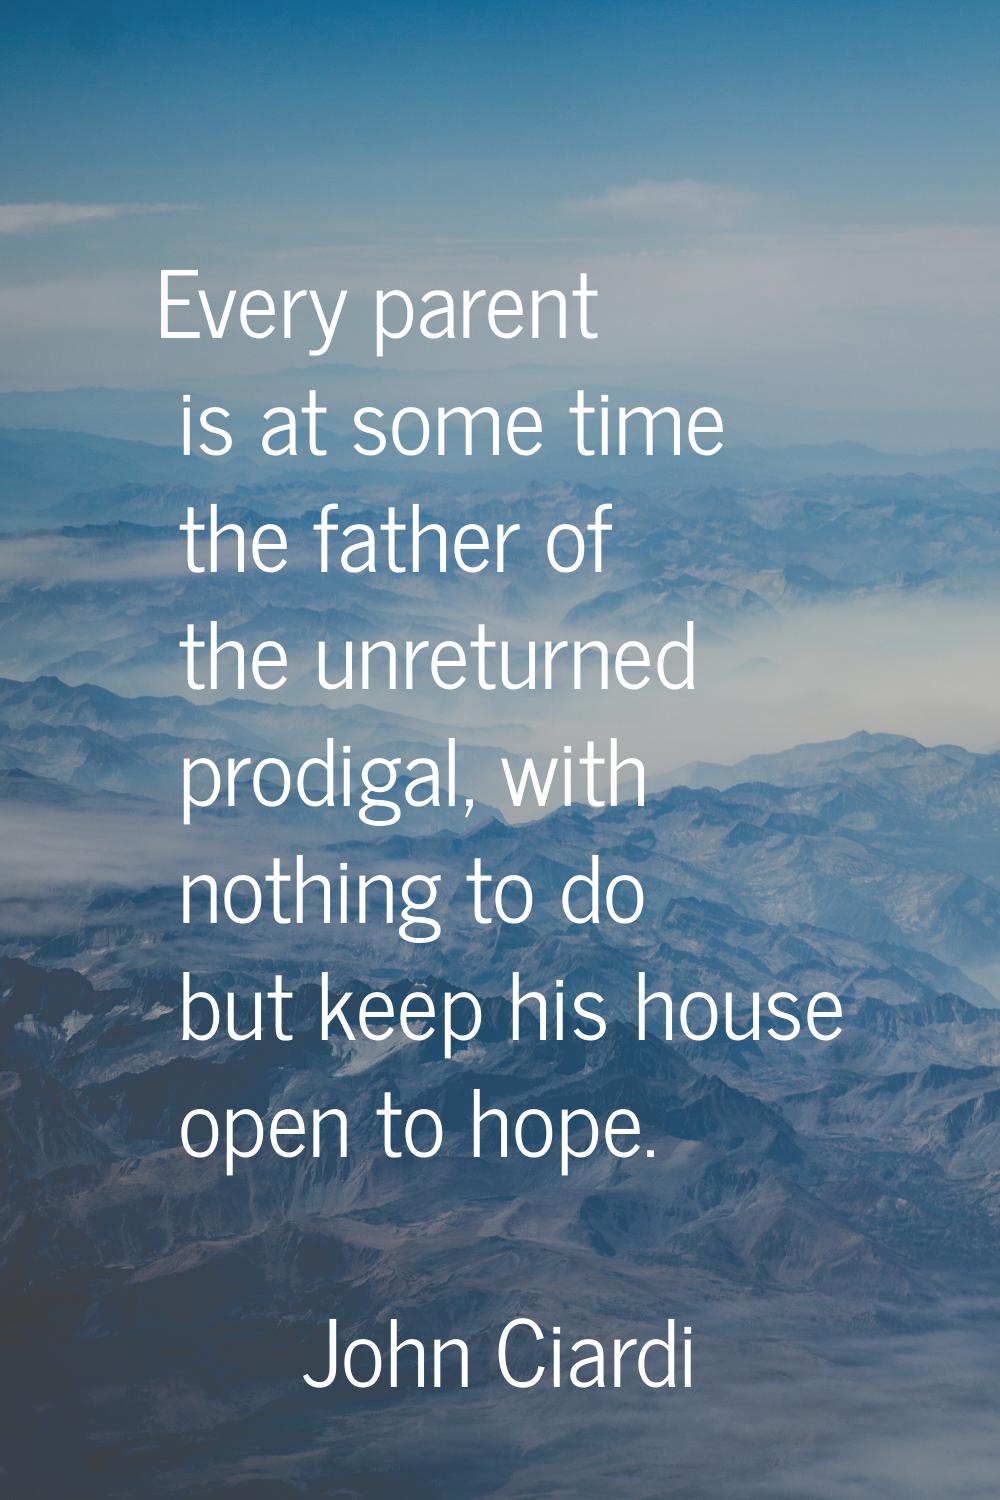 Every parent is at some time the father of the unreturned prodigal, with nothing to do but keep his